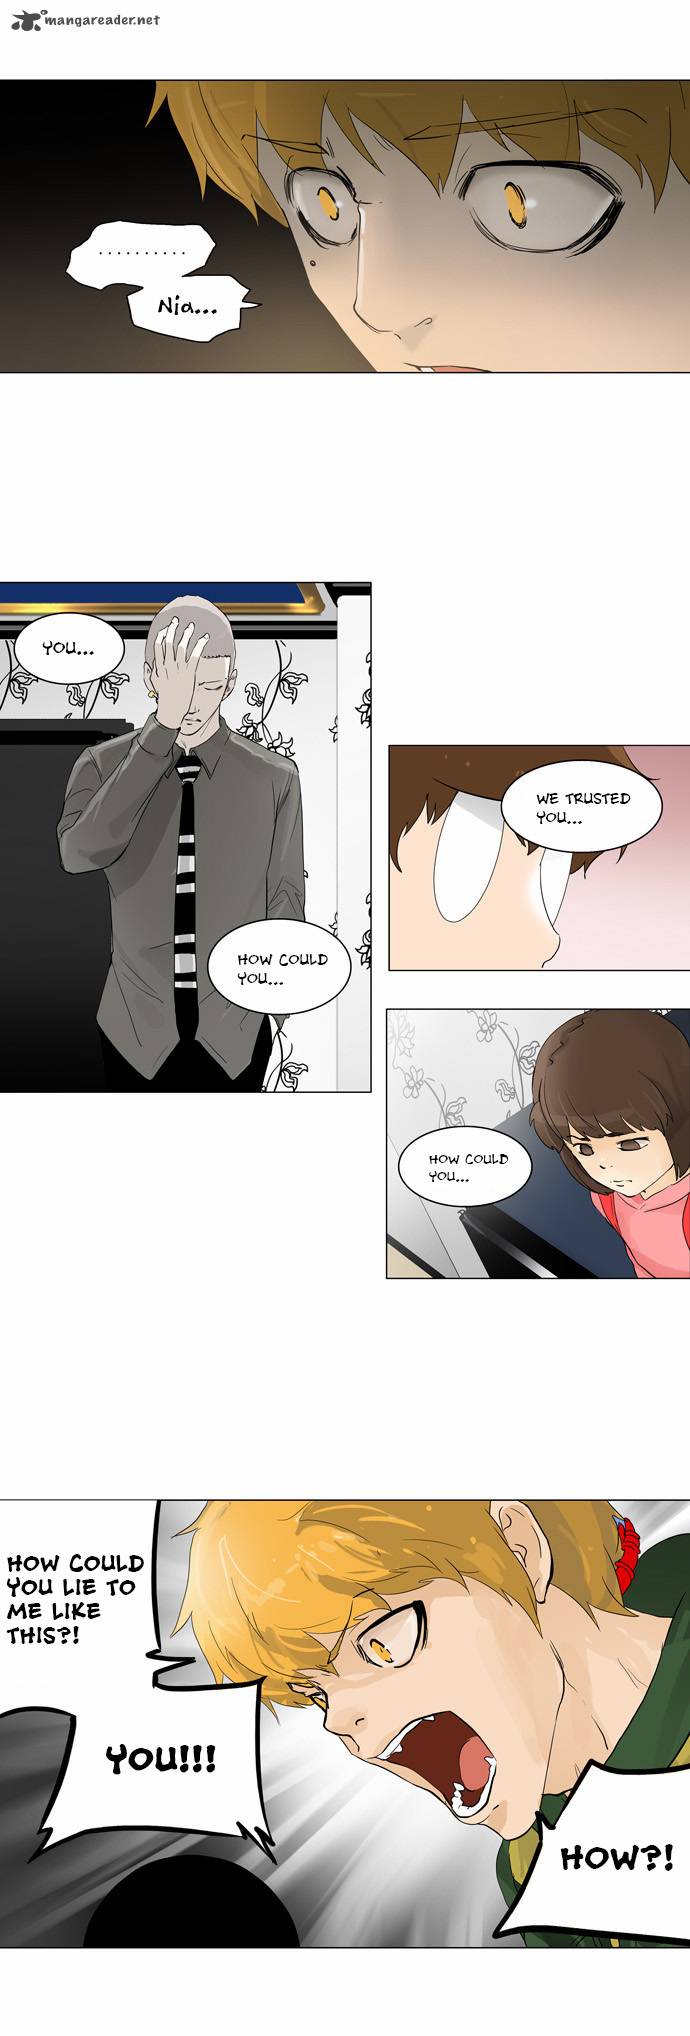 Tower Of God 98 17